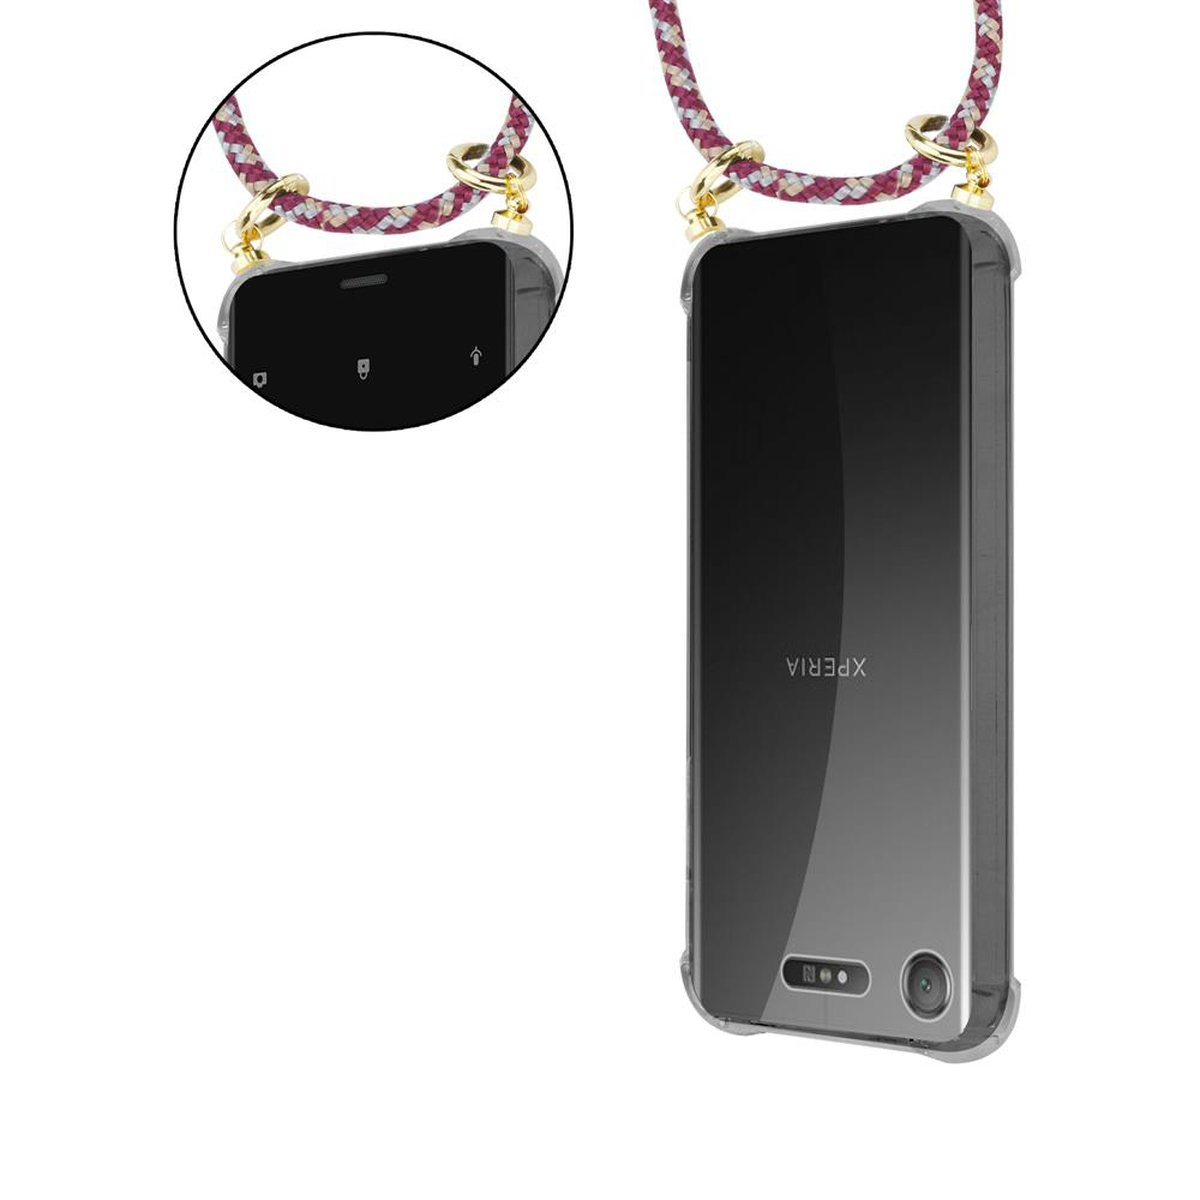 Sony, WEIß ROT Band Hülle, Xperia XZ1, Ringen, und Kette GELB Kordel mit Gold Handy abnehmbarer Backcover, CADORABO